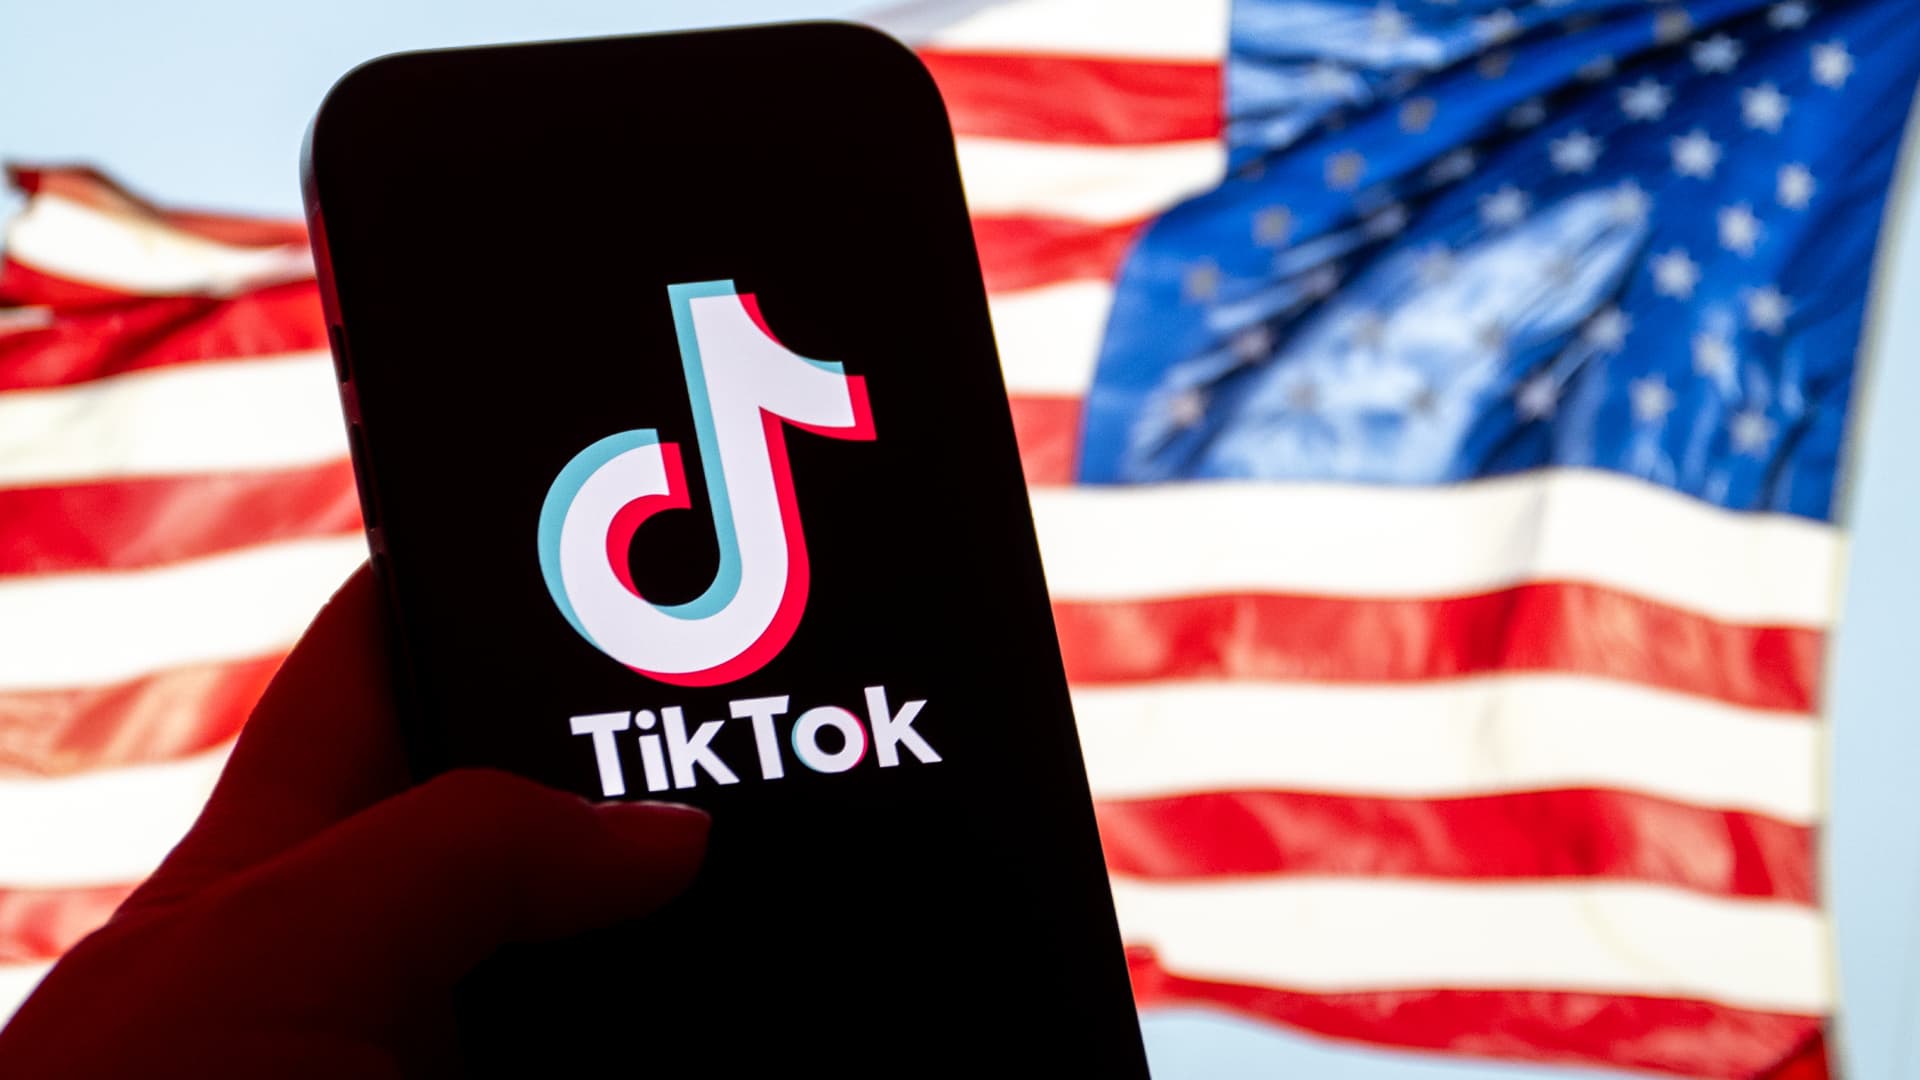 ByteDance, TikTok has spent more than $7 million on lobbying and advertising campaigns